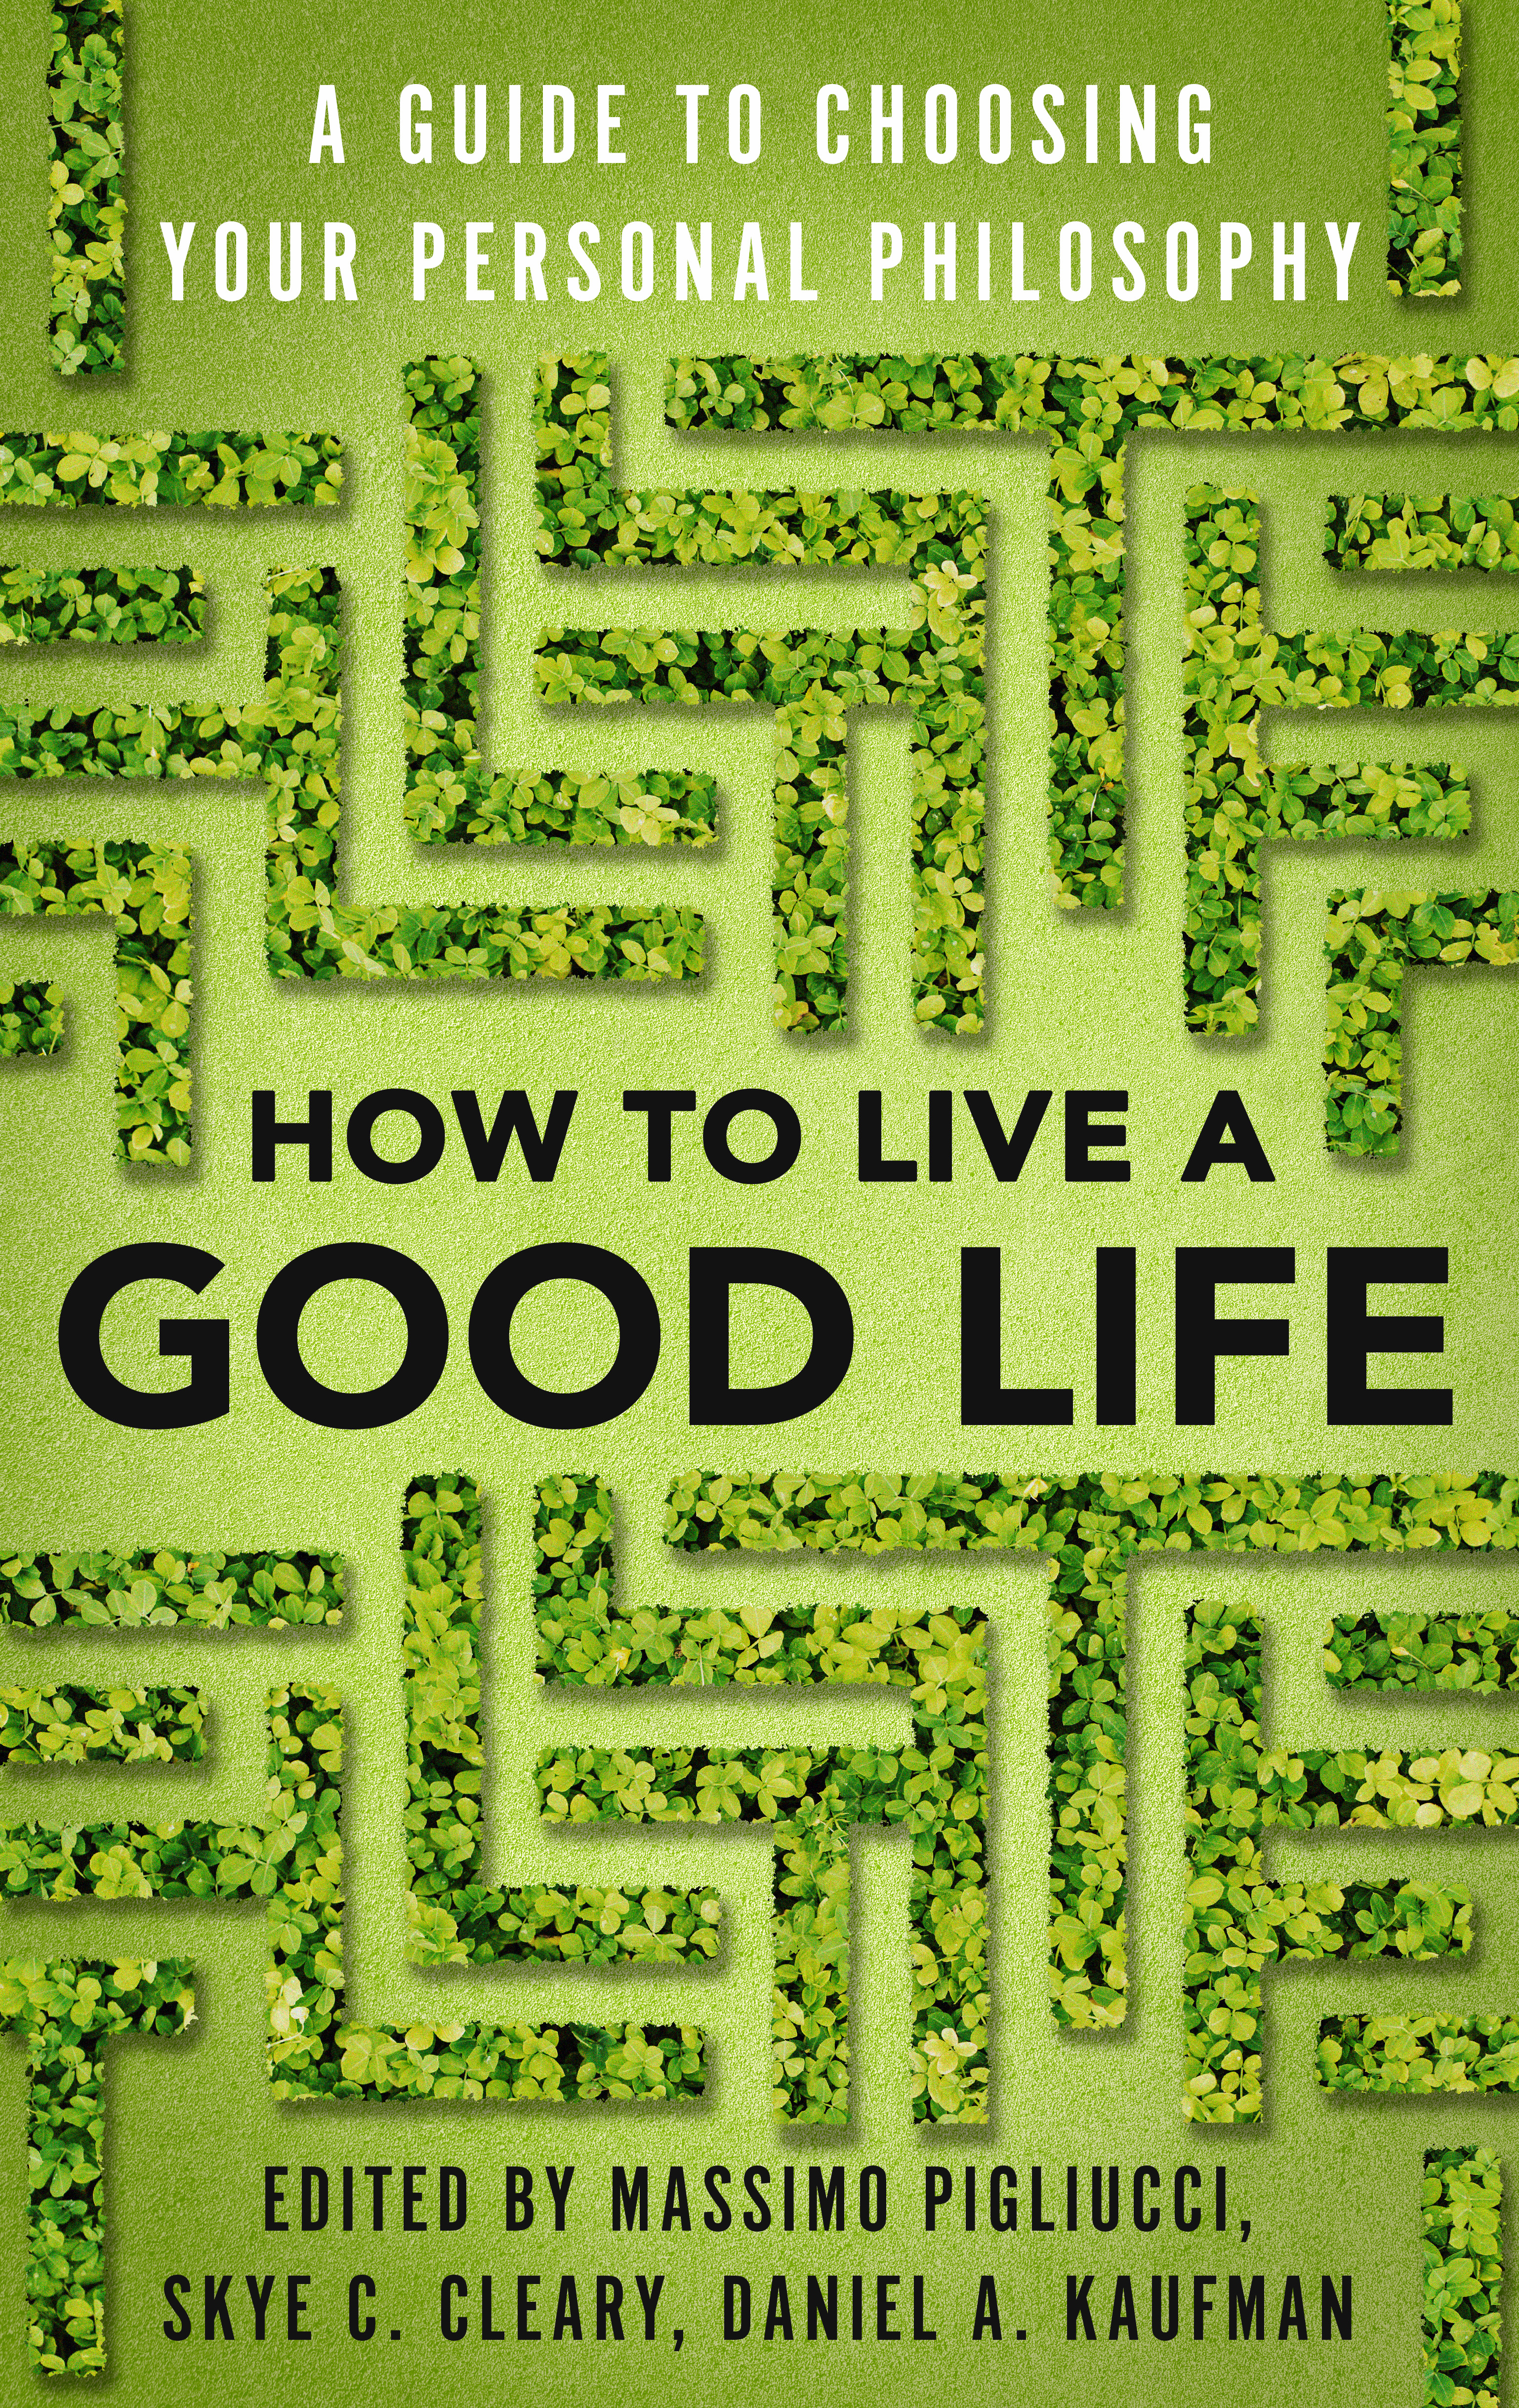 How to Live a Good Life